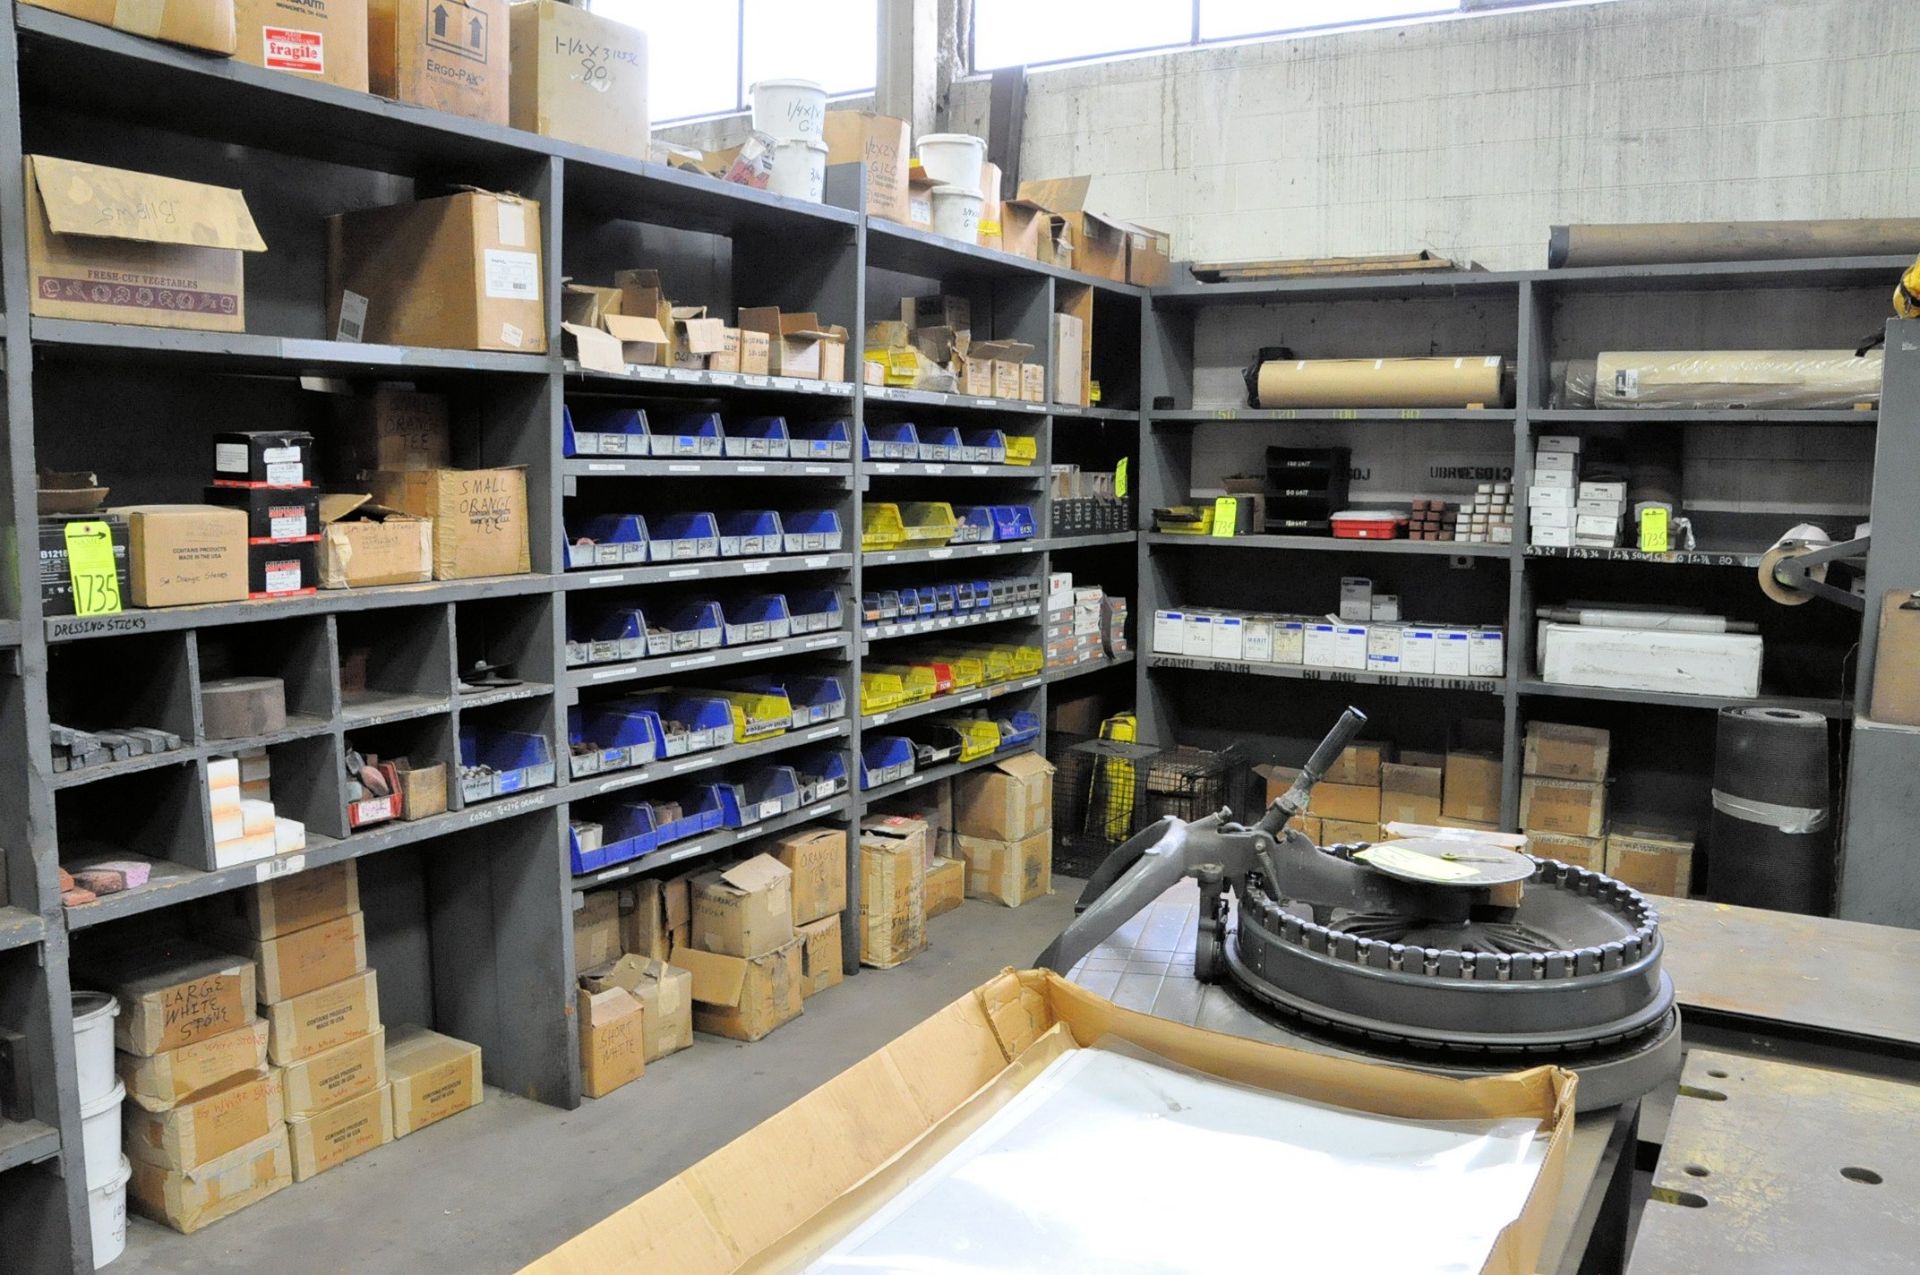 Lot-Grinding Stones, Sanding Supplies, etc. in (6) Sections and Top of Shelving Unit, (Shelving